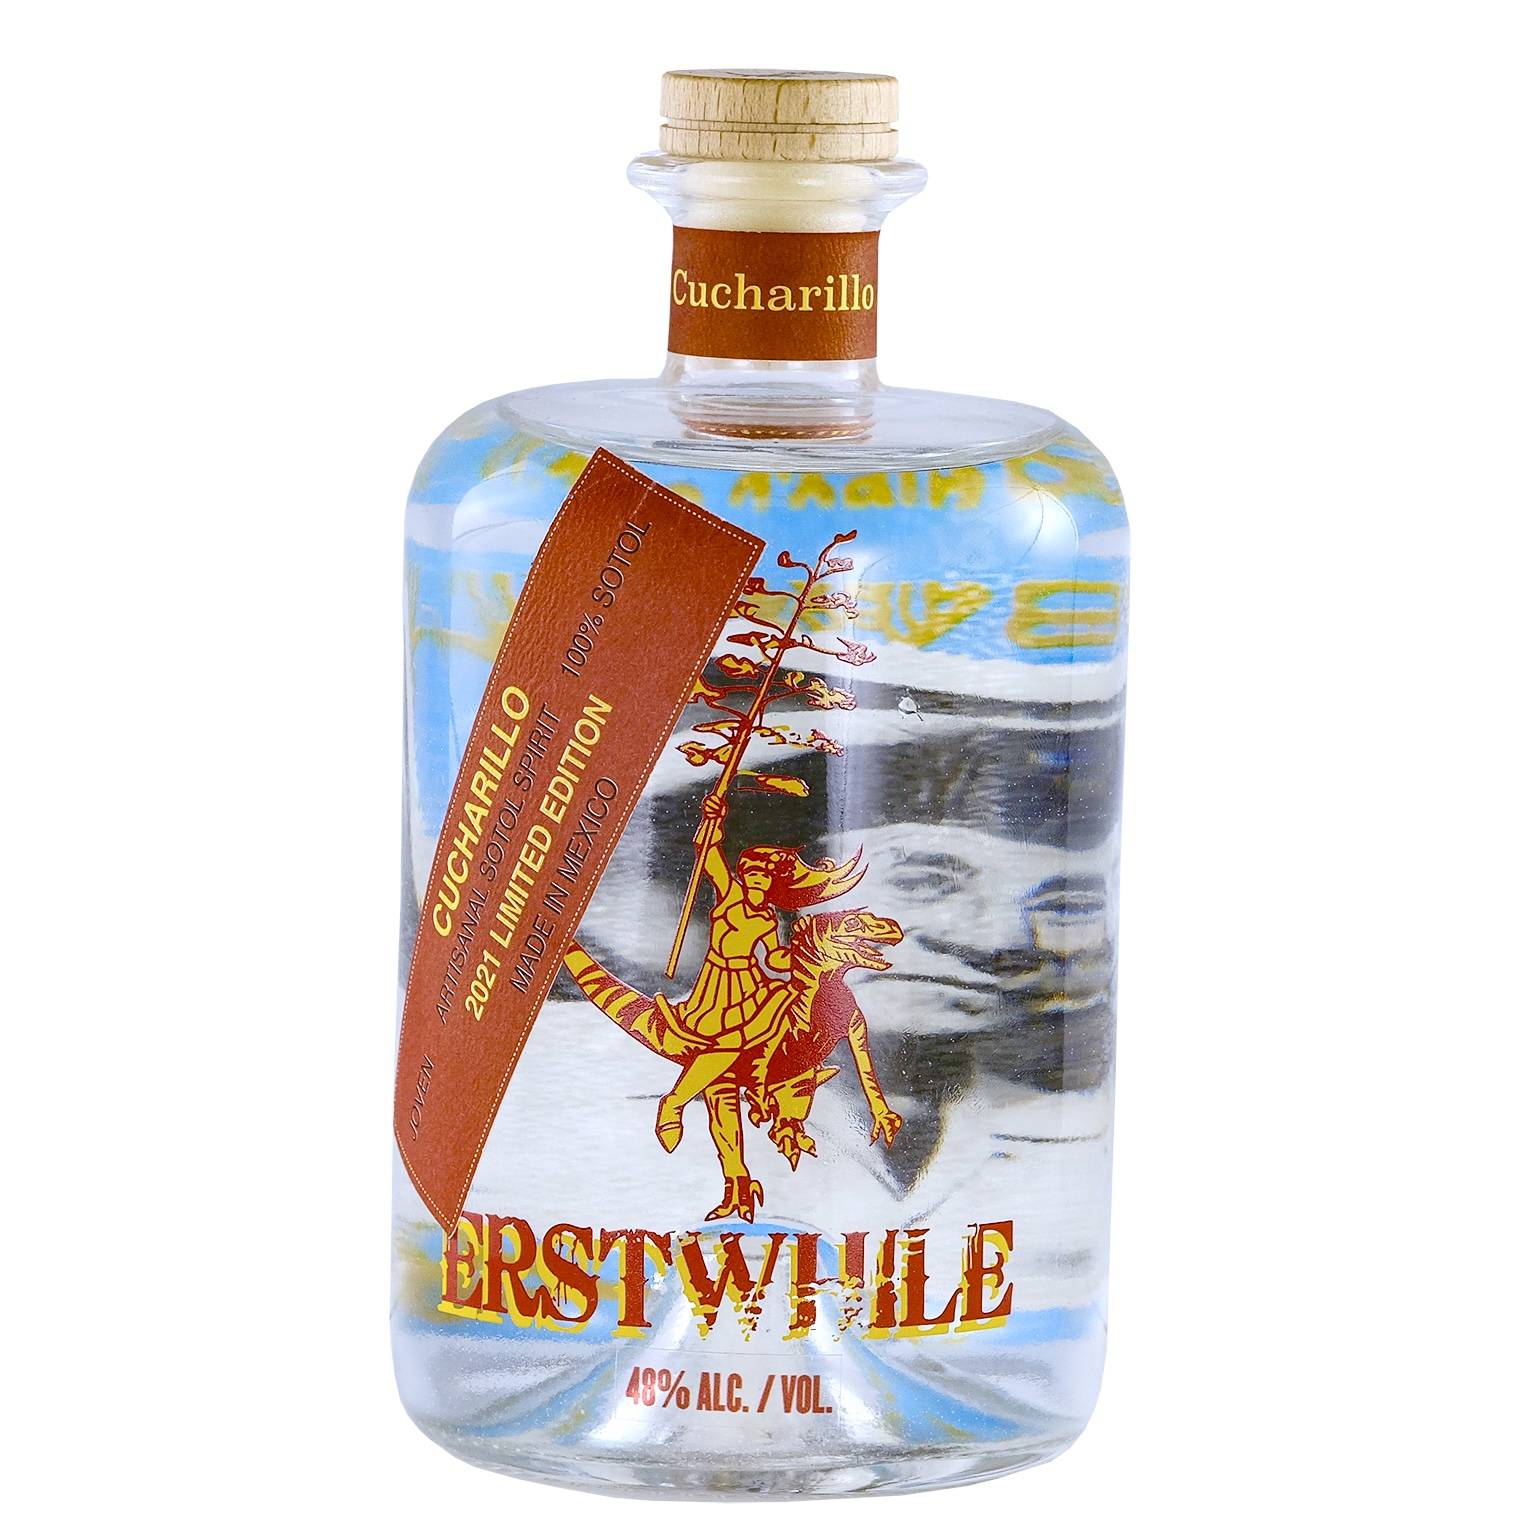 Bottle of Erstwhile Cucharillo Sotol (2021 Limited Edition)